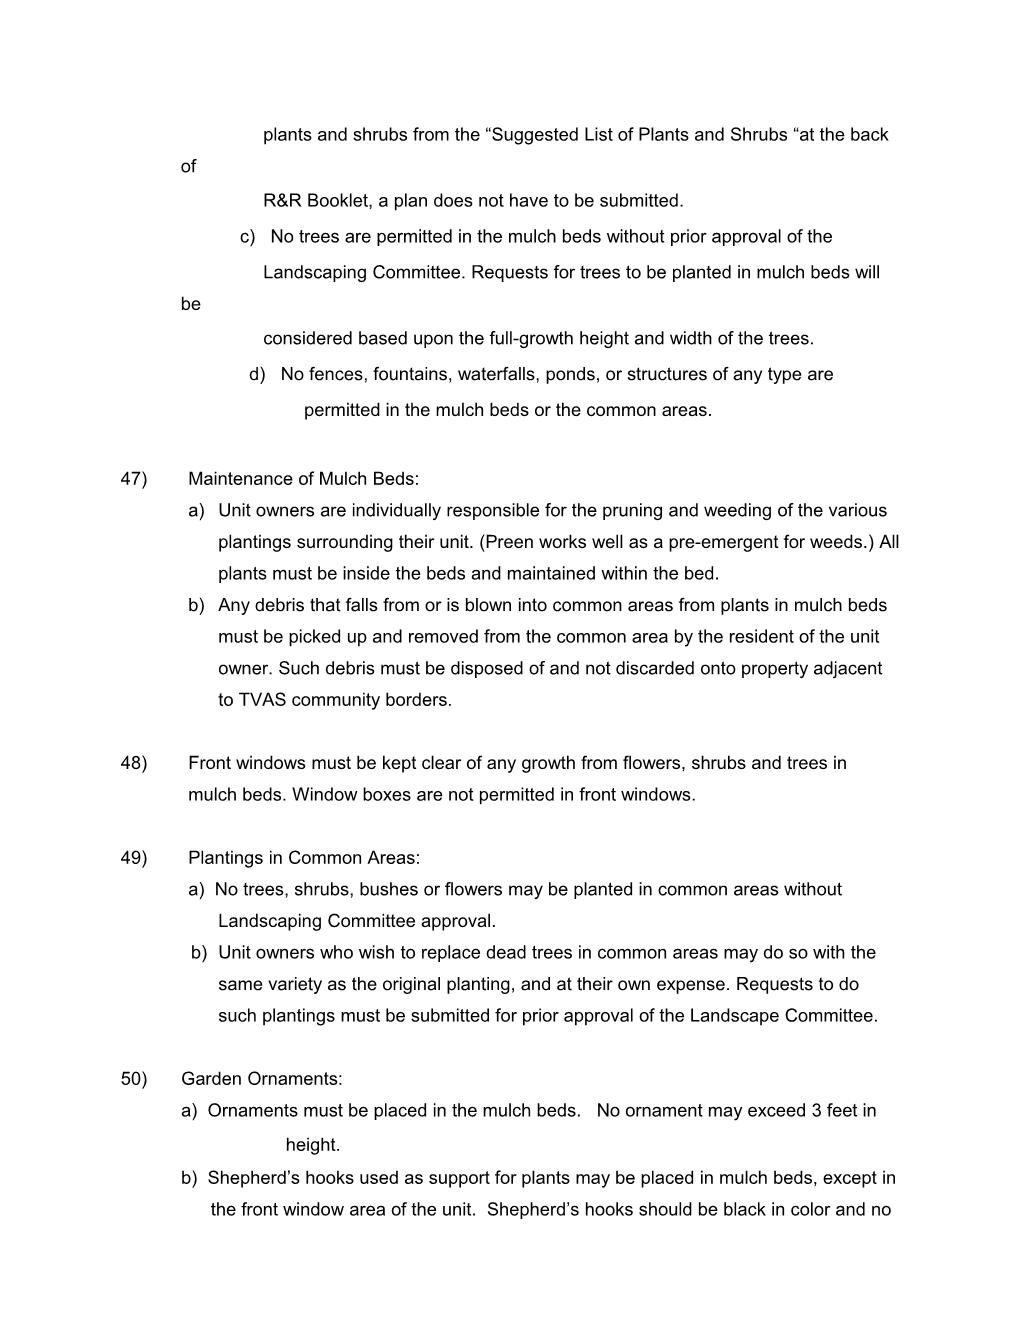 Rules and Regulations s10